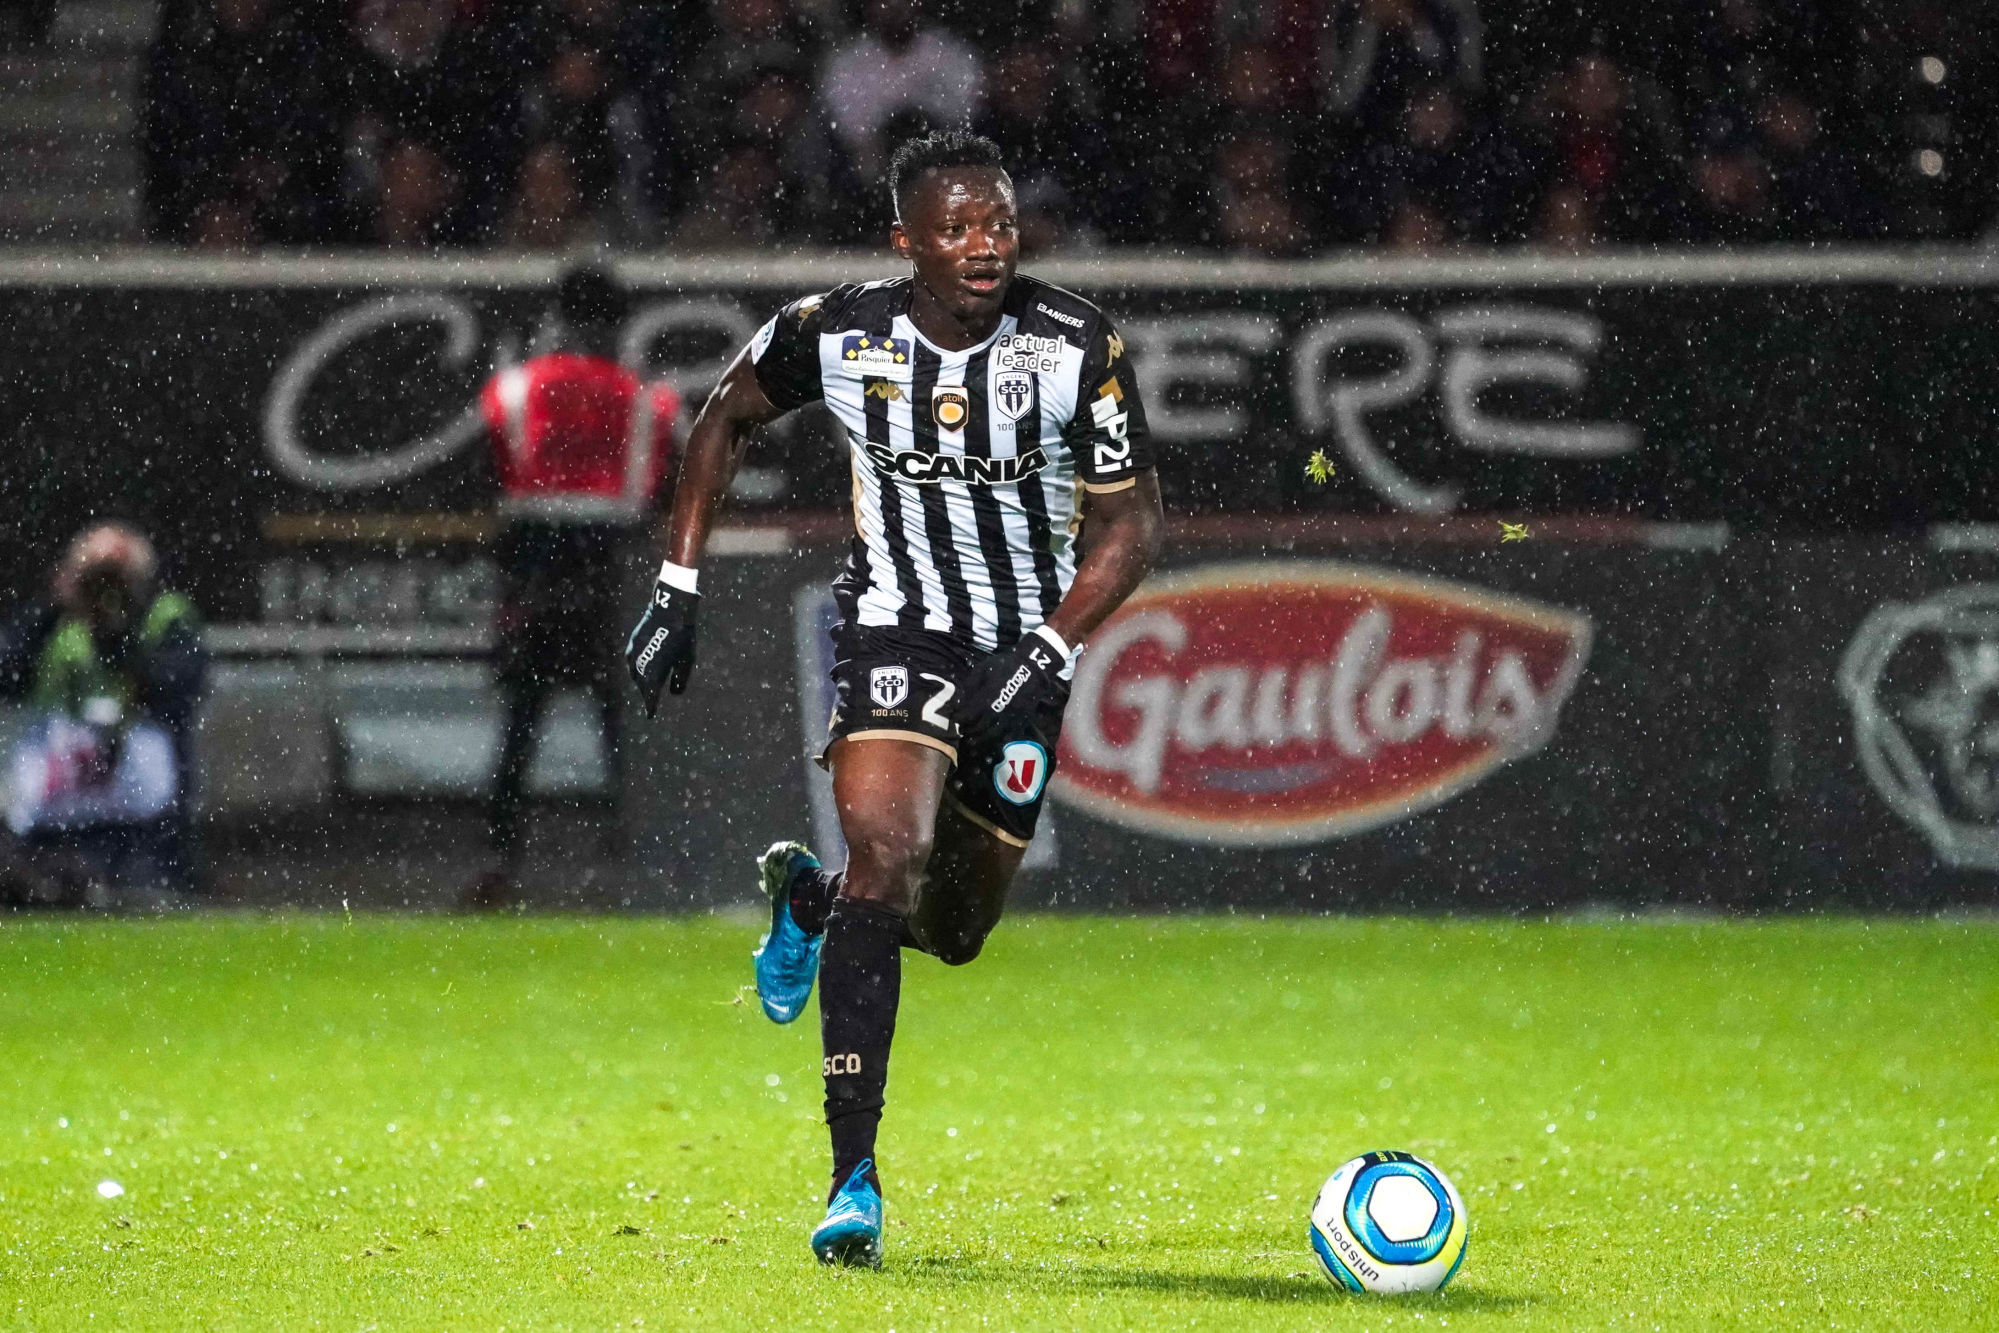 Casimir NINGA of Angers during the Ligue 1 match between Angers SCO and RC Strasbourg at Stade Raymond Kopa on November 2, 2019 in Angers, France. (Photo by Eddy Lemaistre/Icon Sport) - Casimir NINGA - Stade Raymond Kopa - Angers (France)